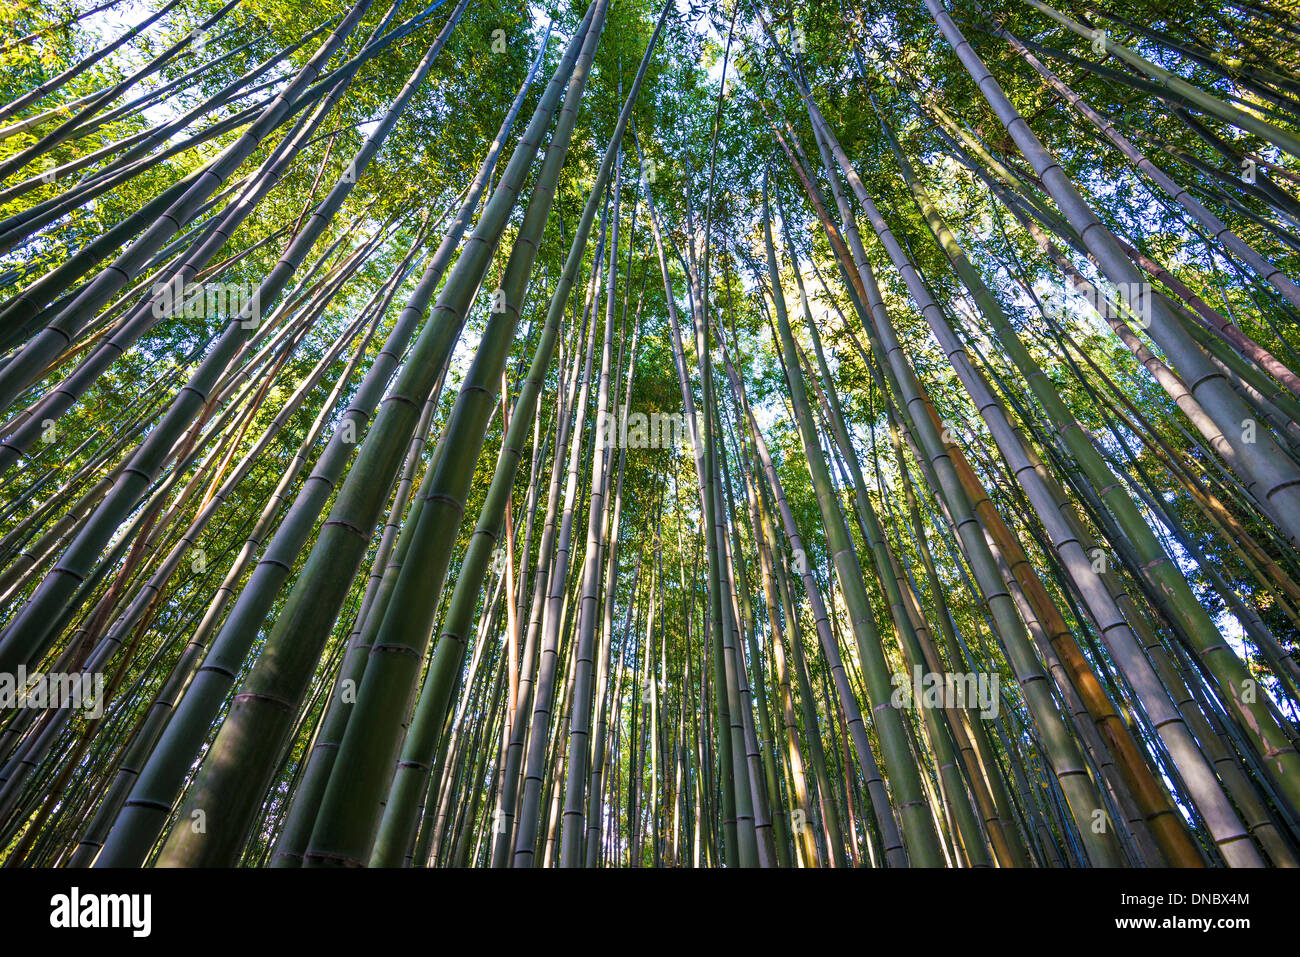 Bamboo forest of Kyoto, Japan. Stock Photo